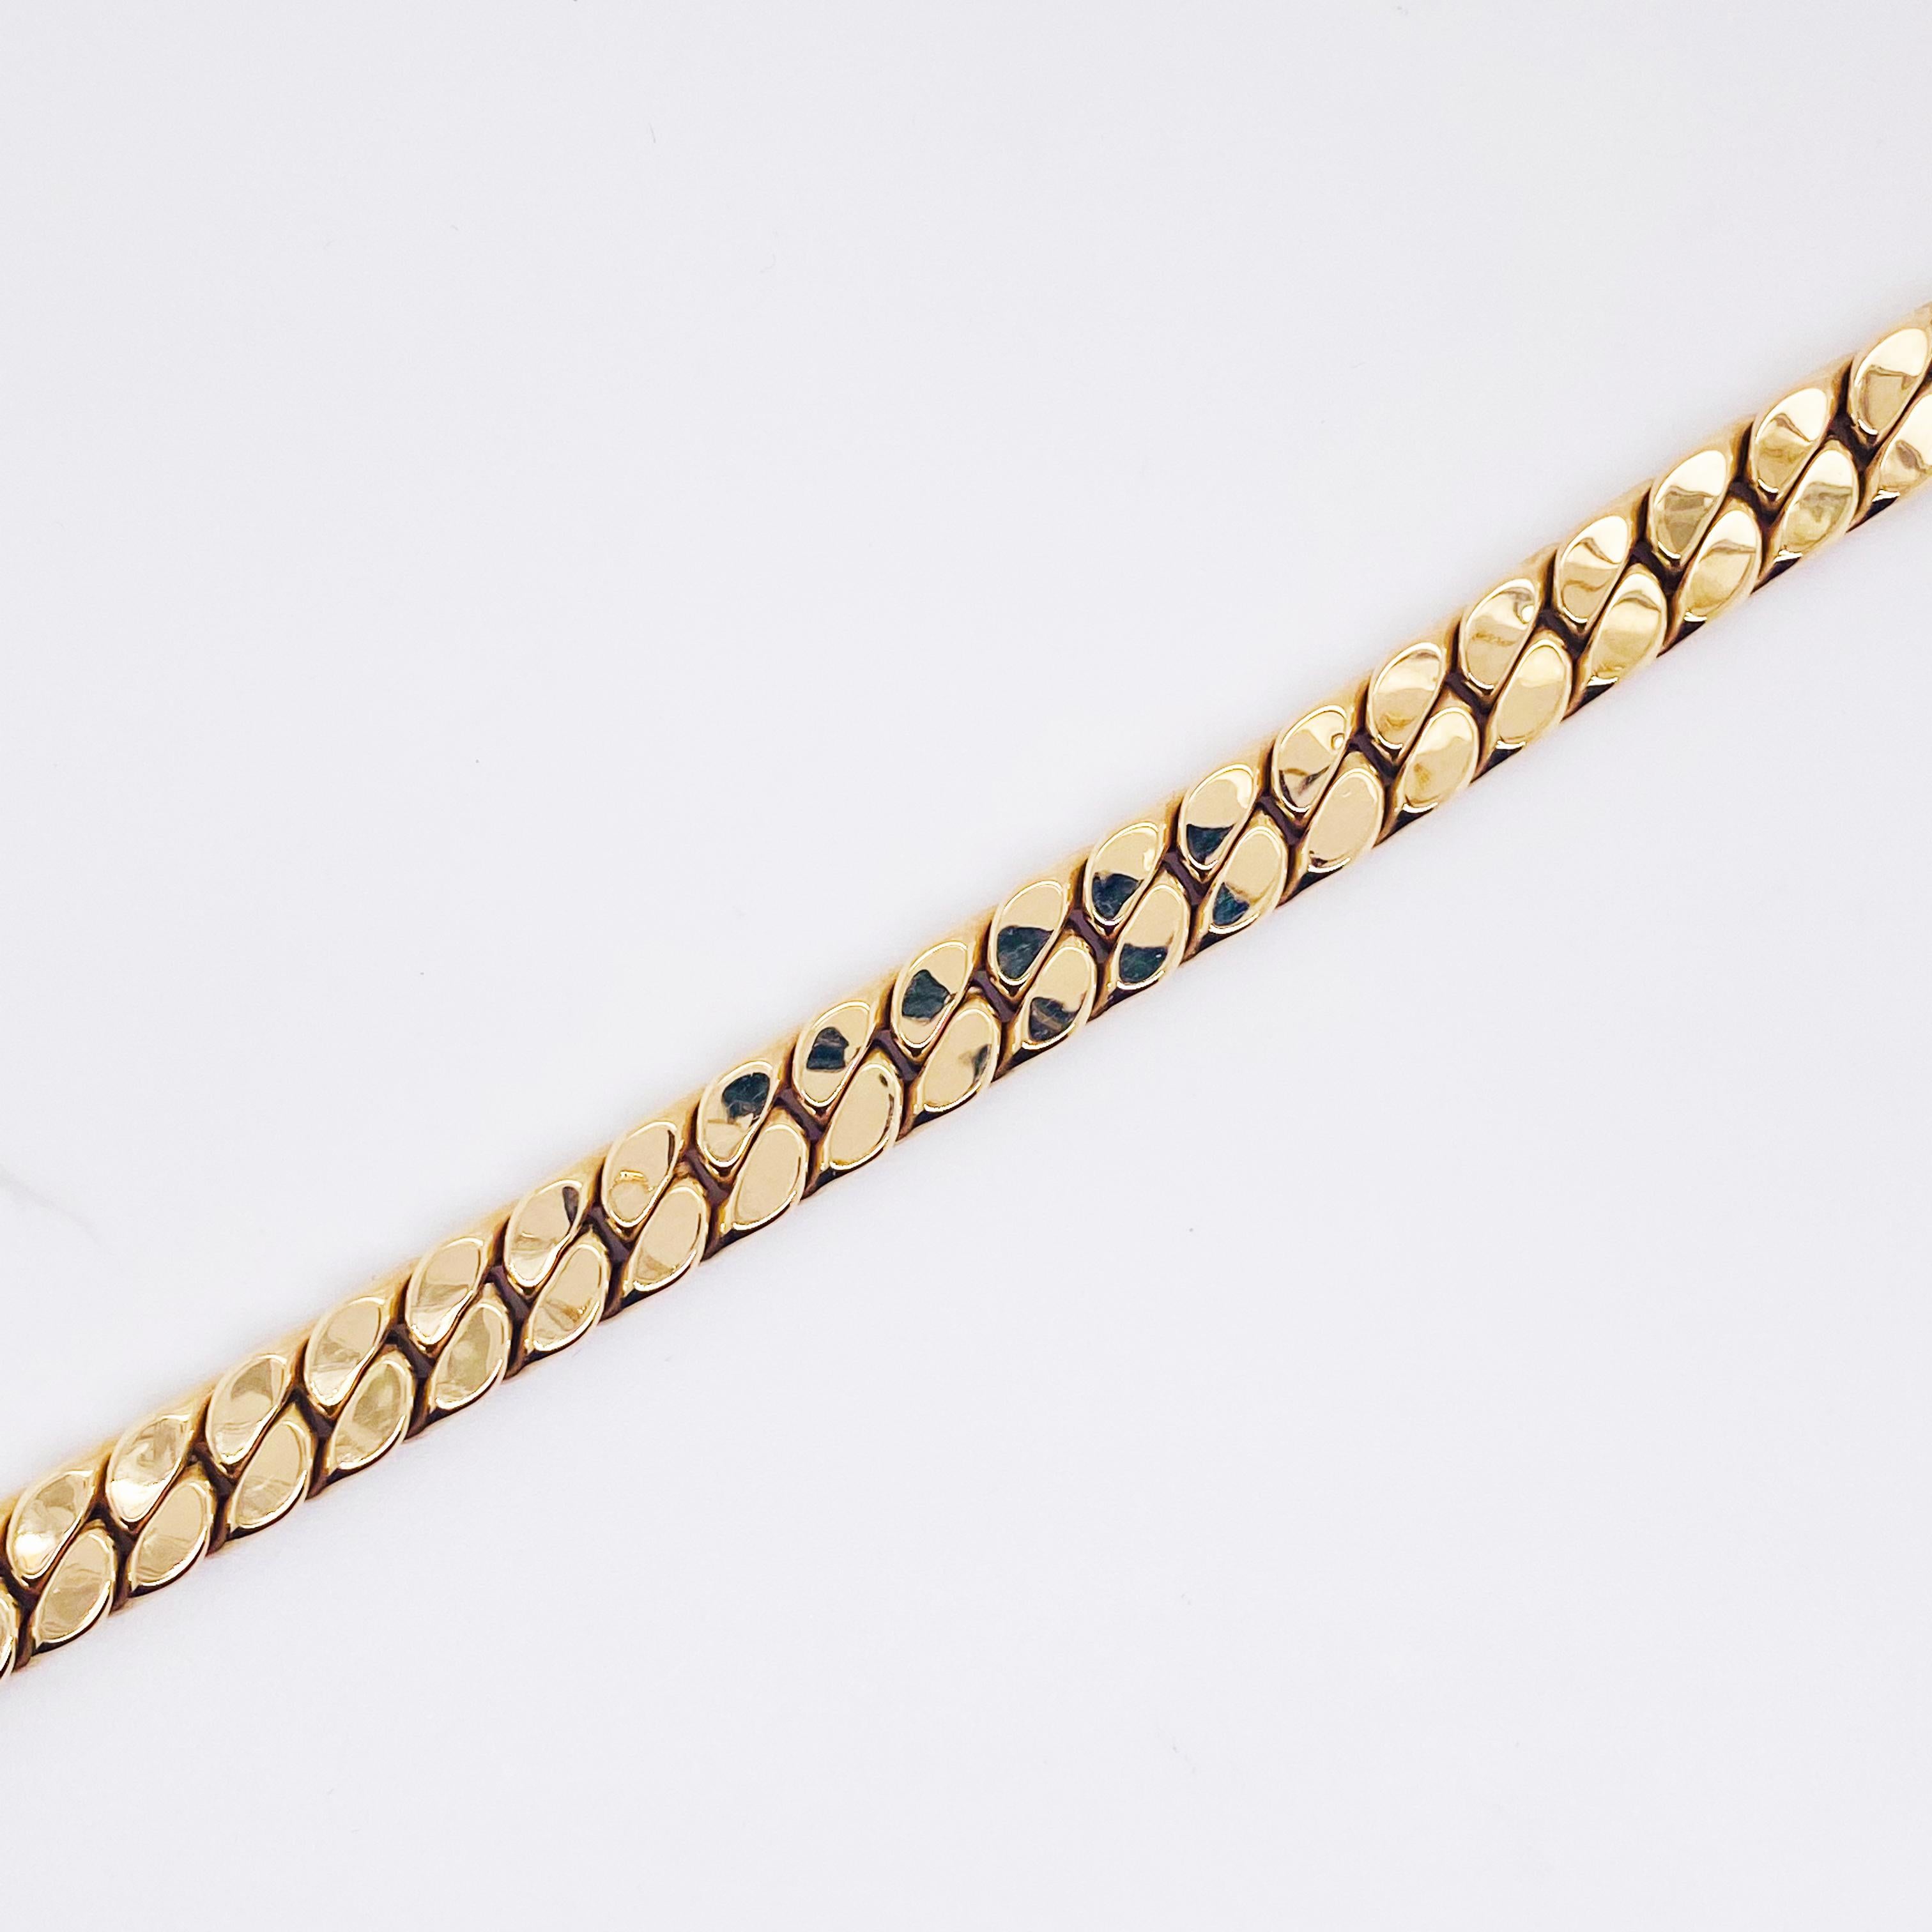 This 8 inch gold bracelet looks great on a large woman's wrist or a man's wrist. If is designed and made out of 14 karat yellow gold. This means that it is NOT PLATED and it has a super heavy look since it is 7 millimeters wide. The bracelet is